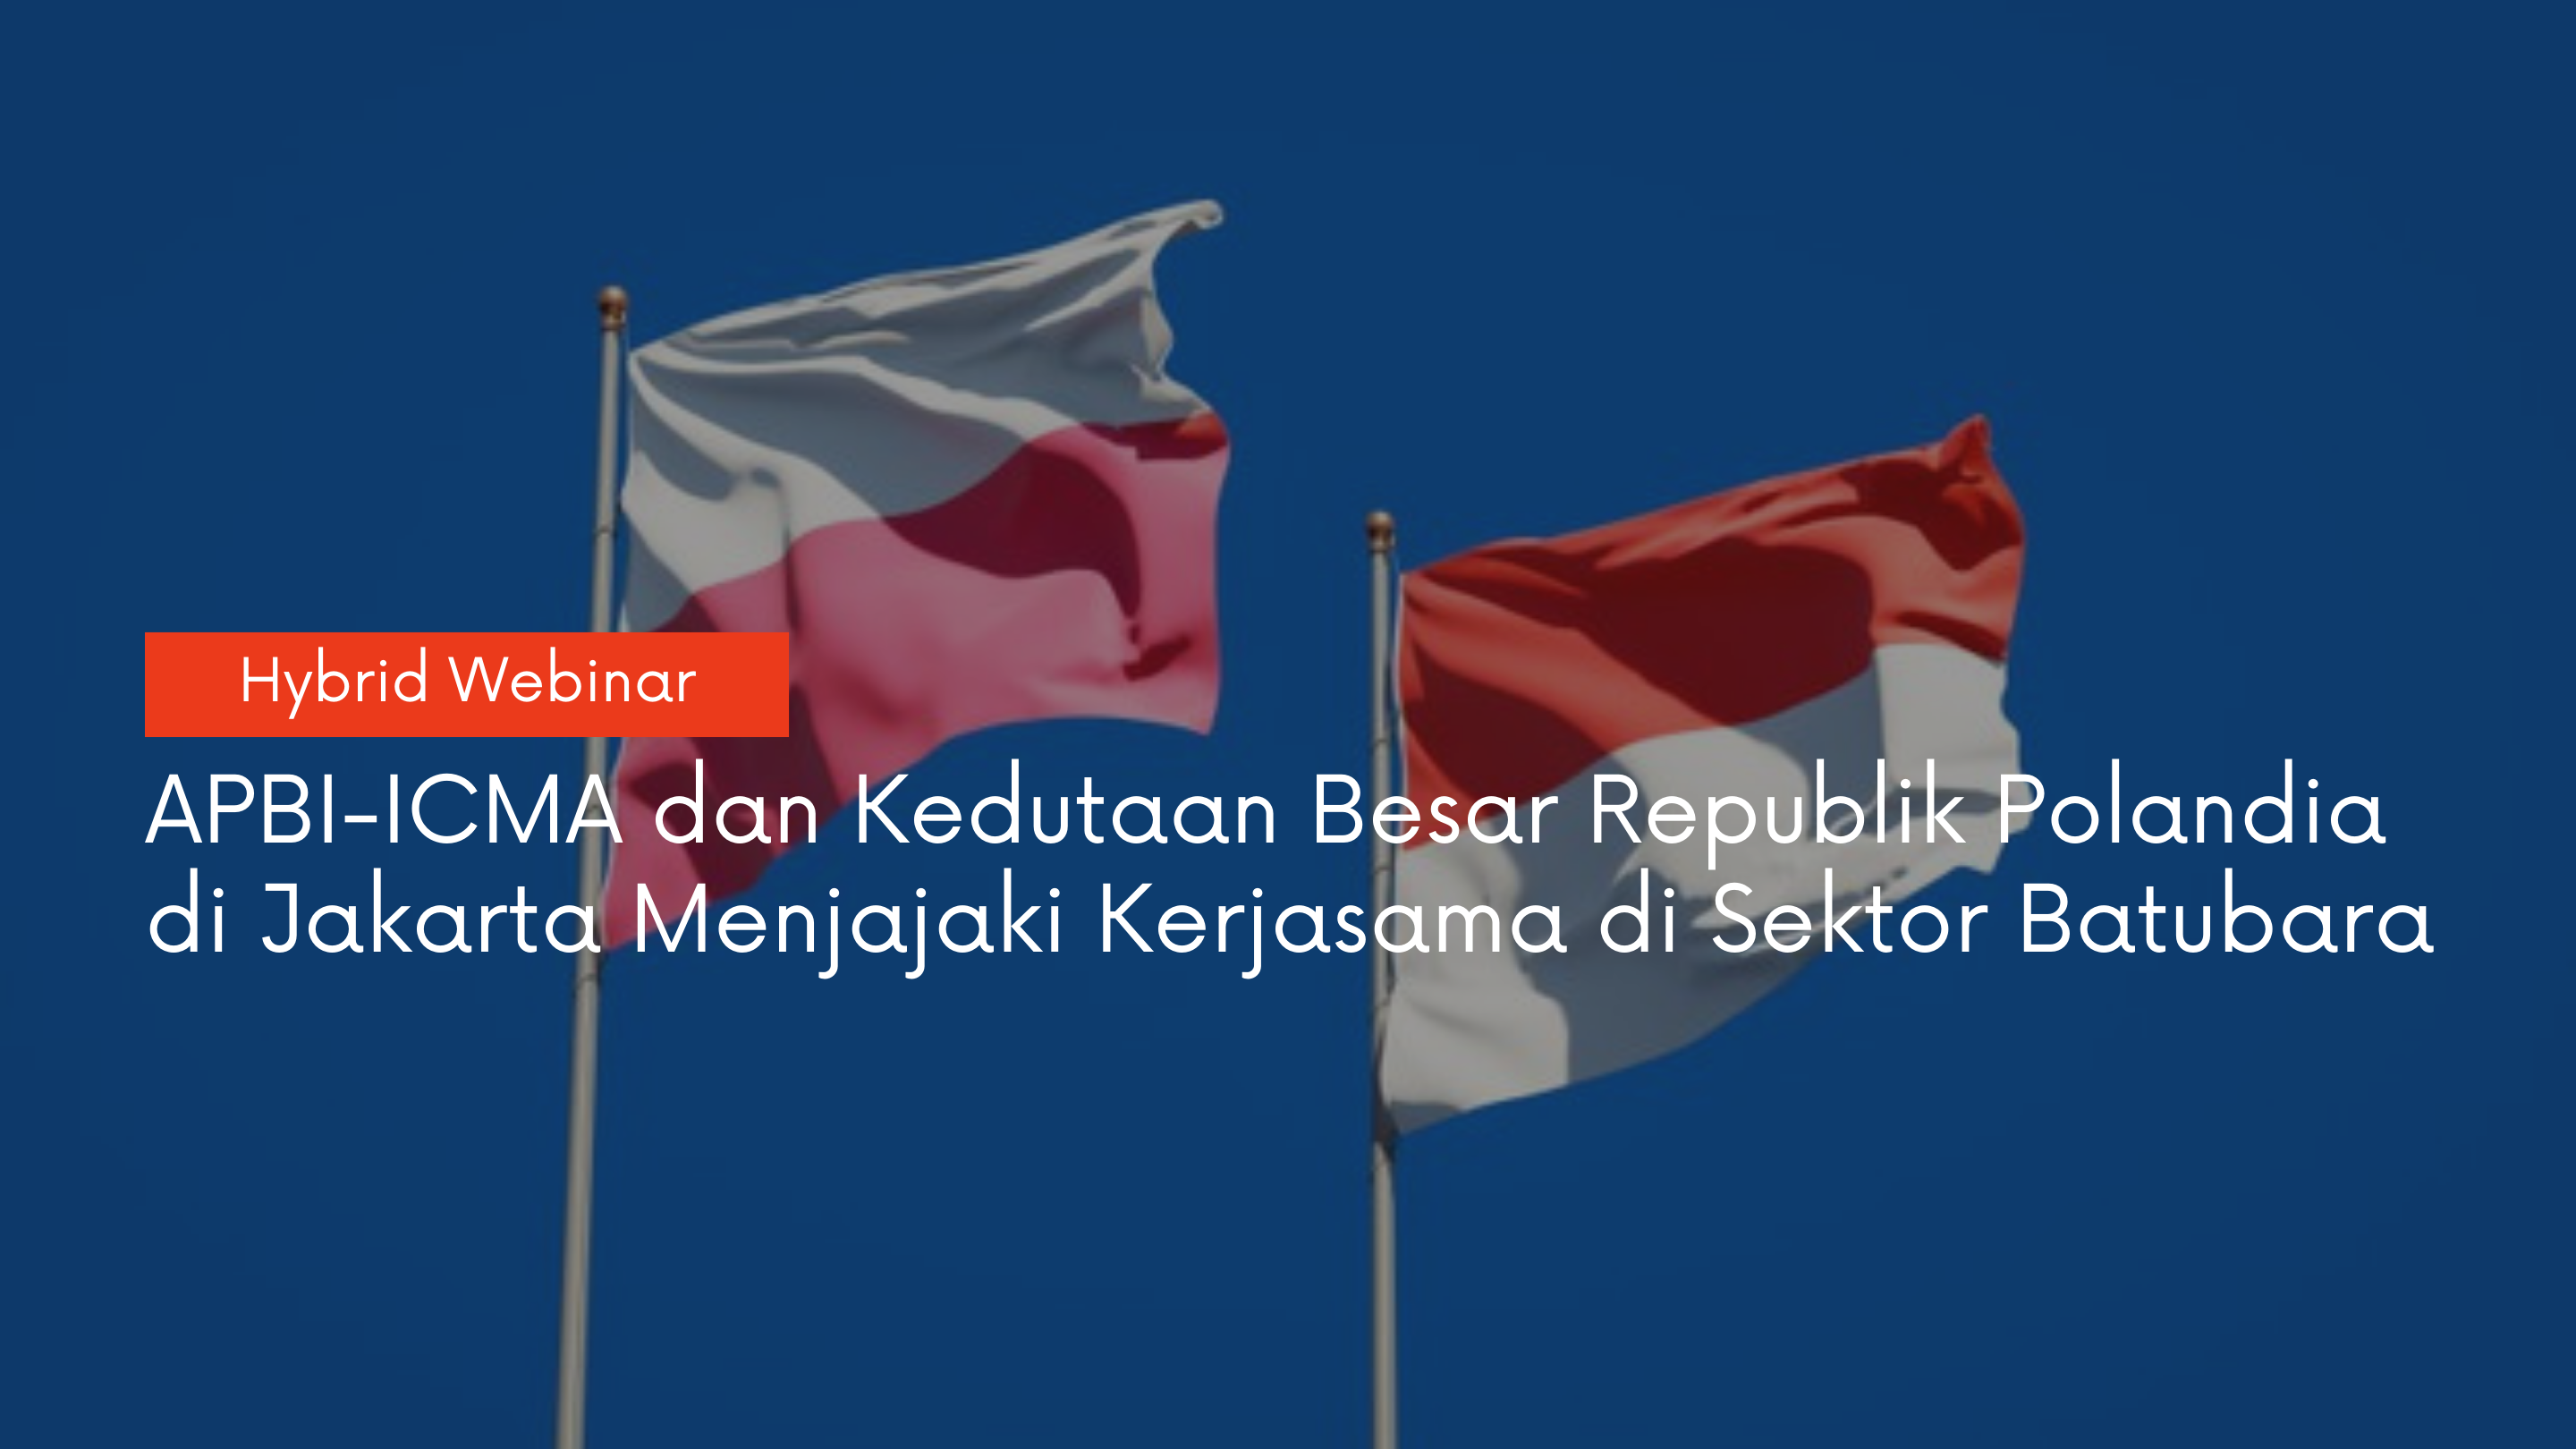 Opportunities on Polish-Indonesian Coal Mining Sector Through Advanced Technology